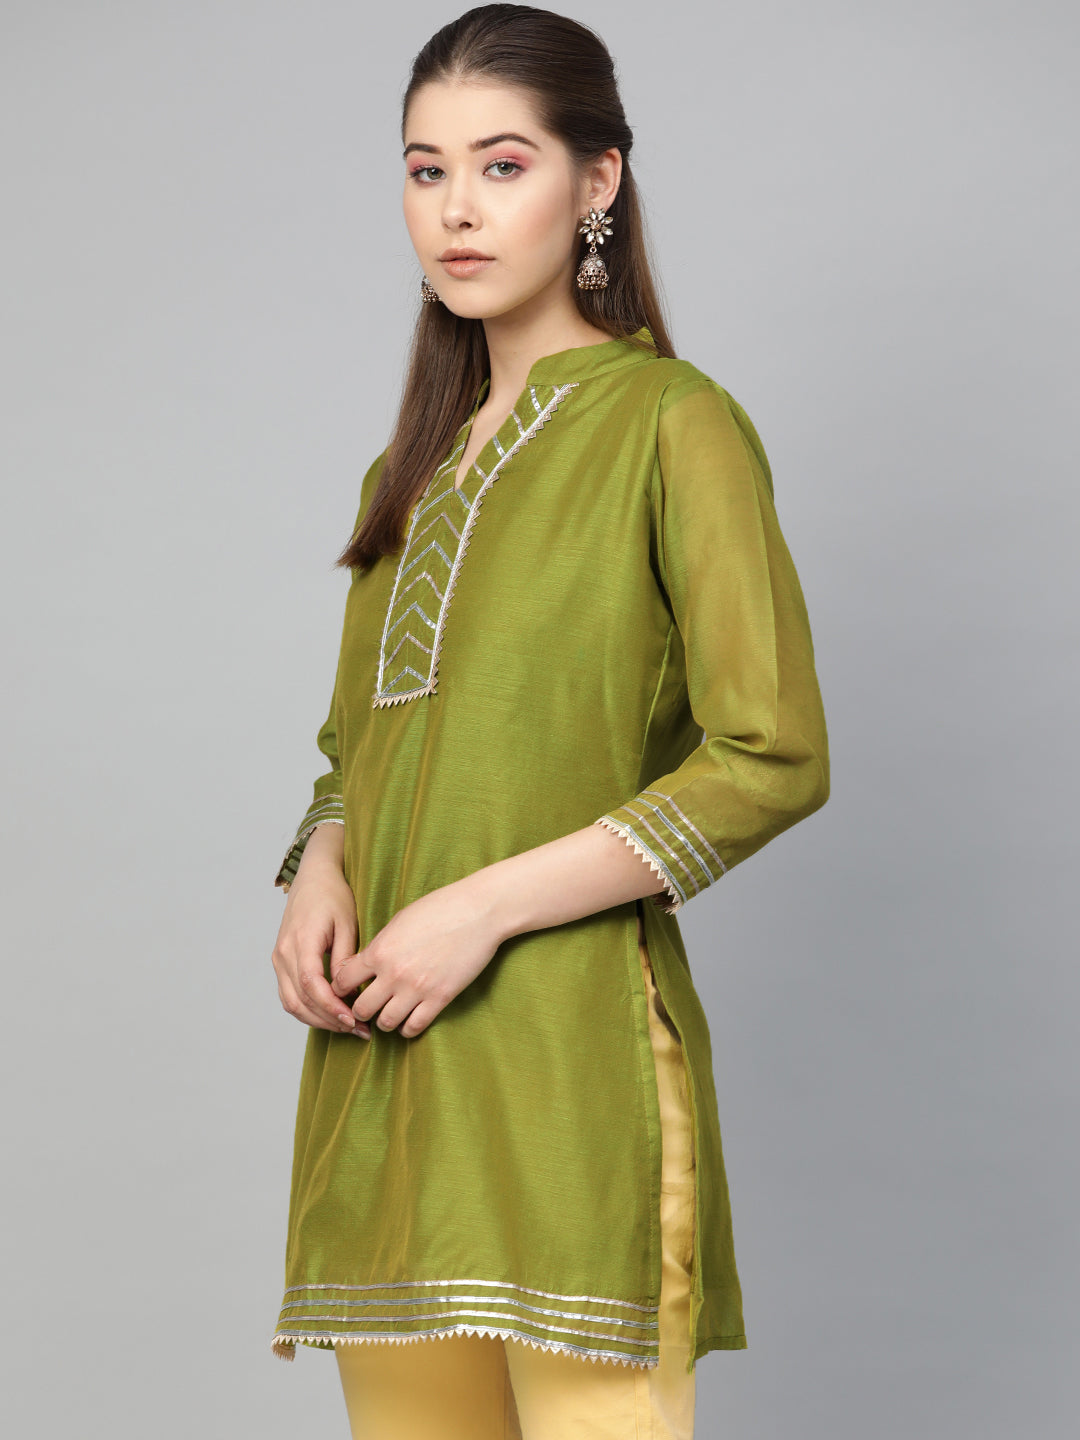 Bhama Couture Olive Green Silk Tunic